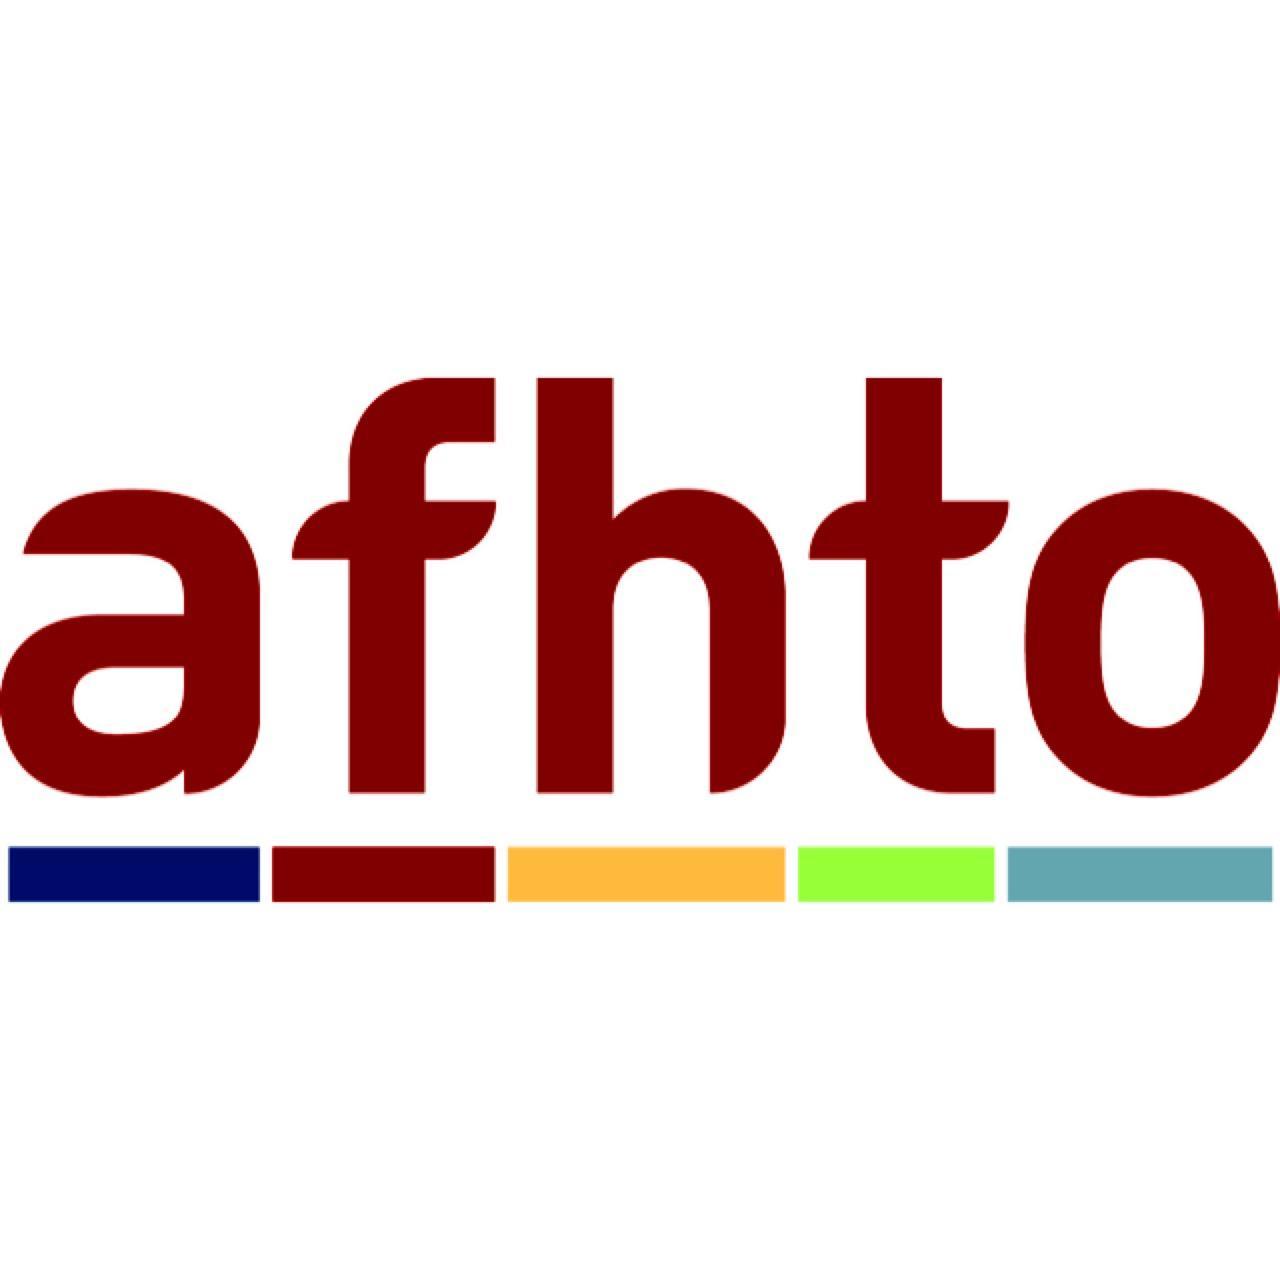 The Association of Family Health Teams of Ontario (AFHTO) is a not-for-profit association representing interprofessional primary care teams in Ontario.